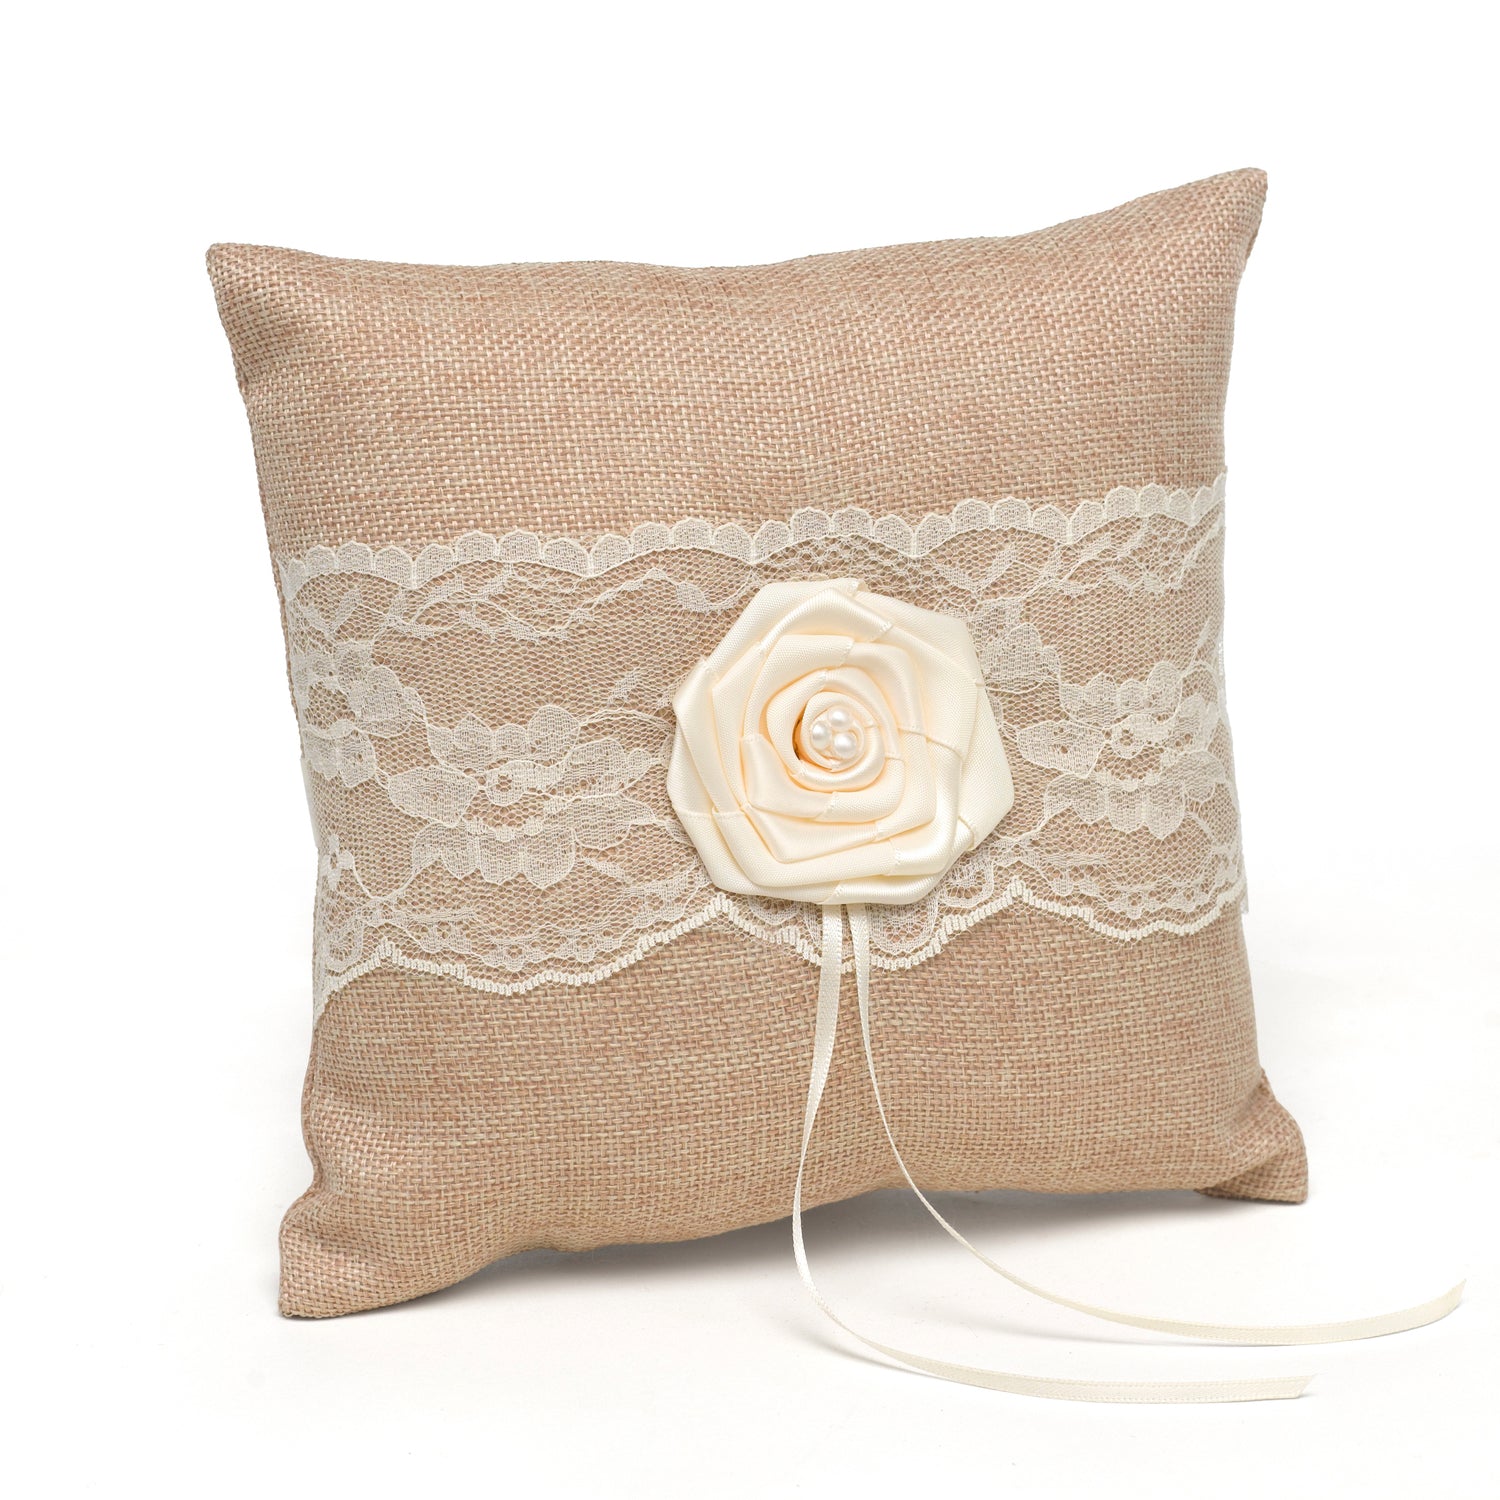 Rustic Country Ring Bearer Pillow